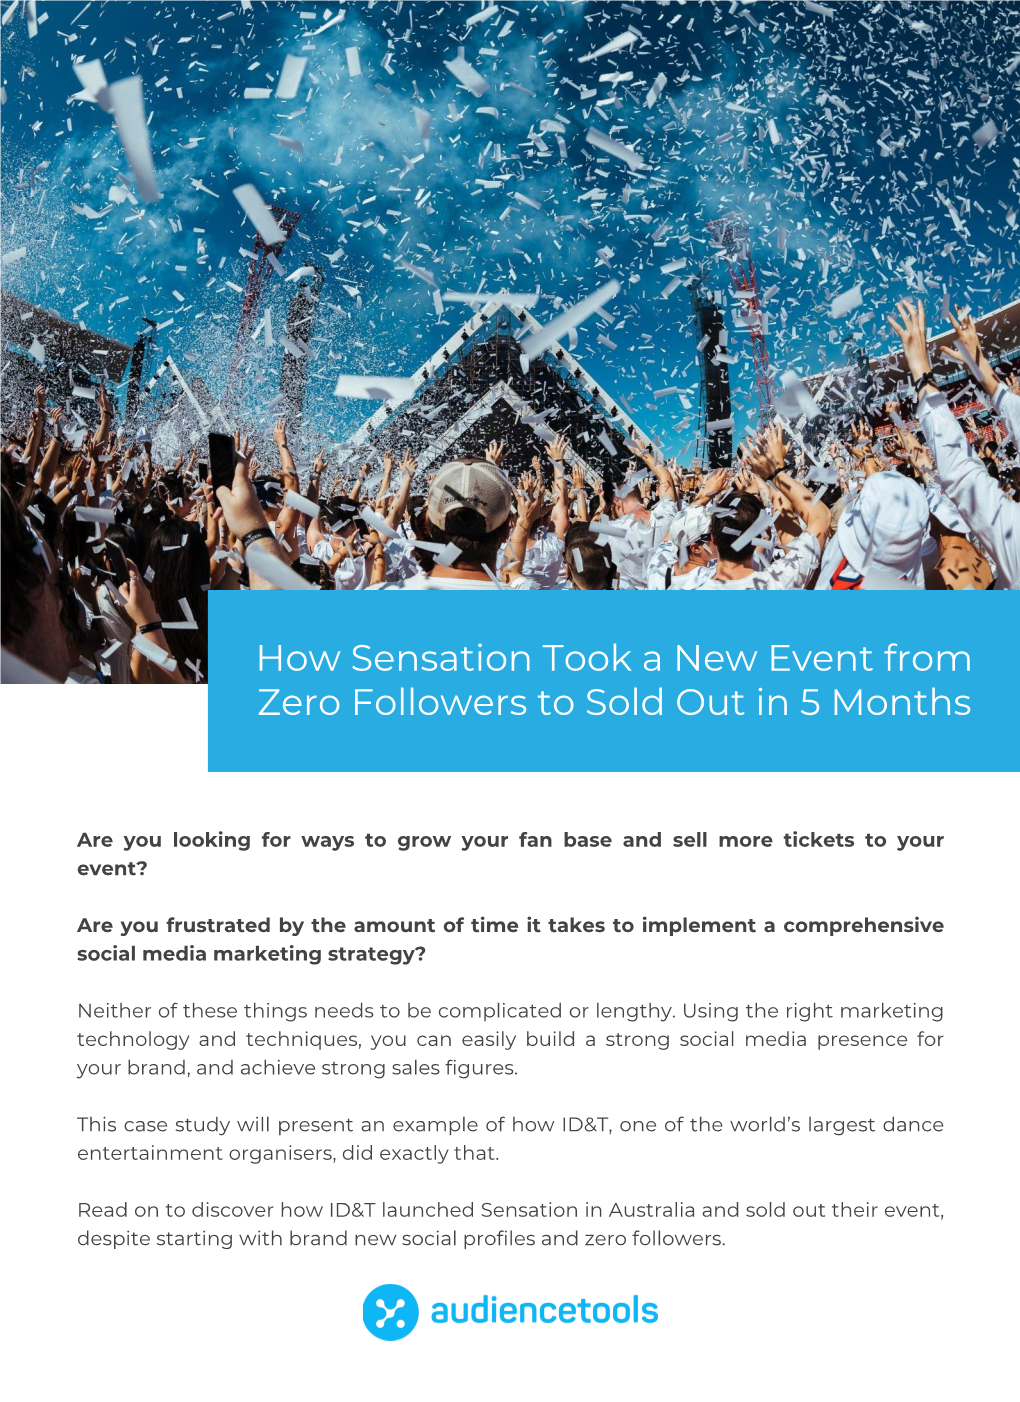 How Sensation Took a New Event from Zero Followers to Sold out in 5